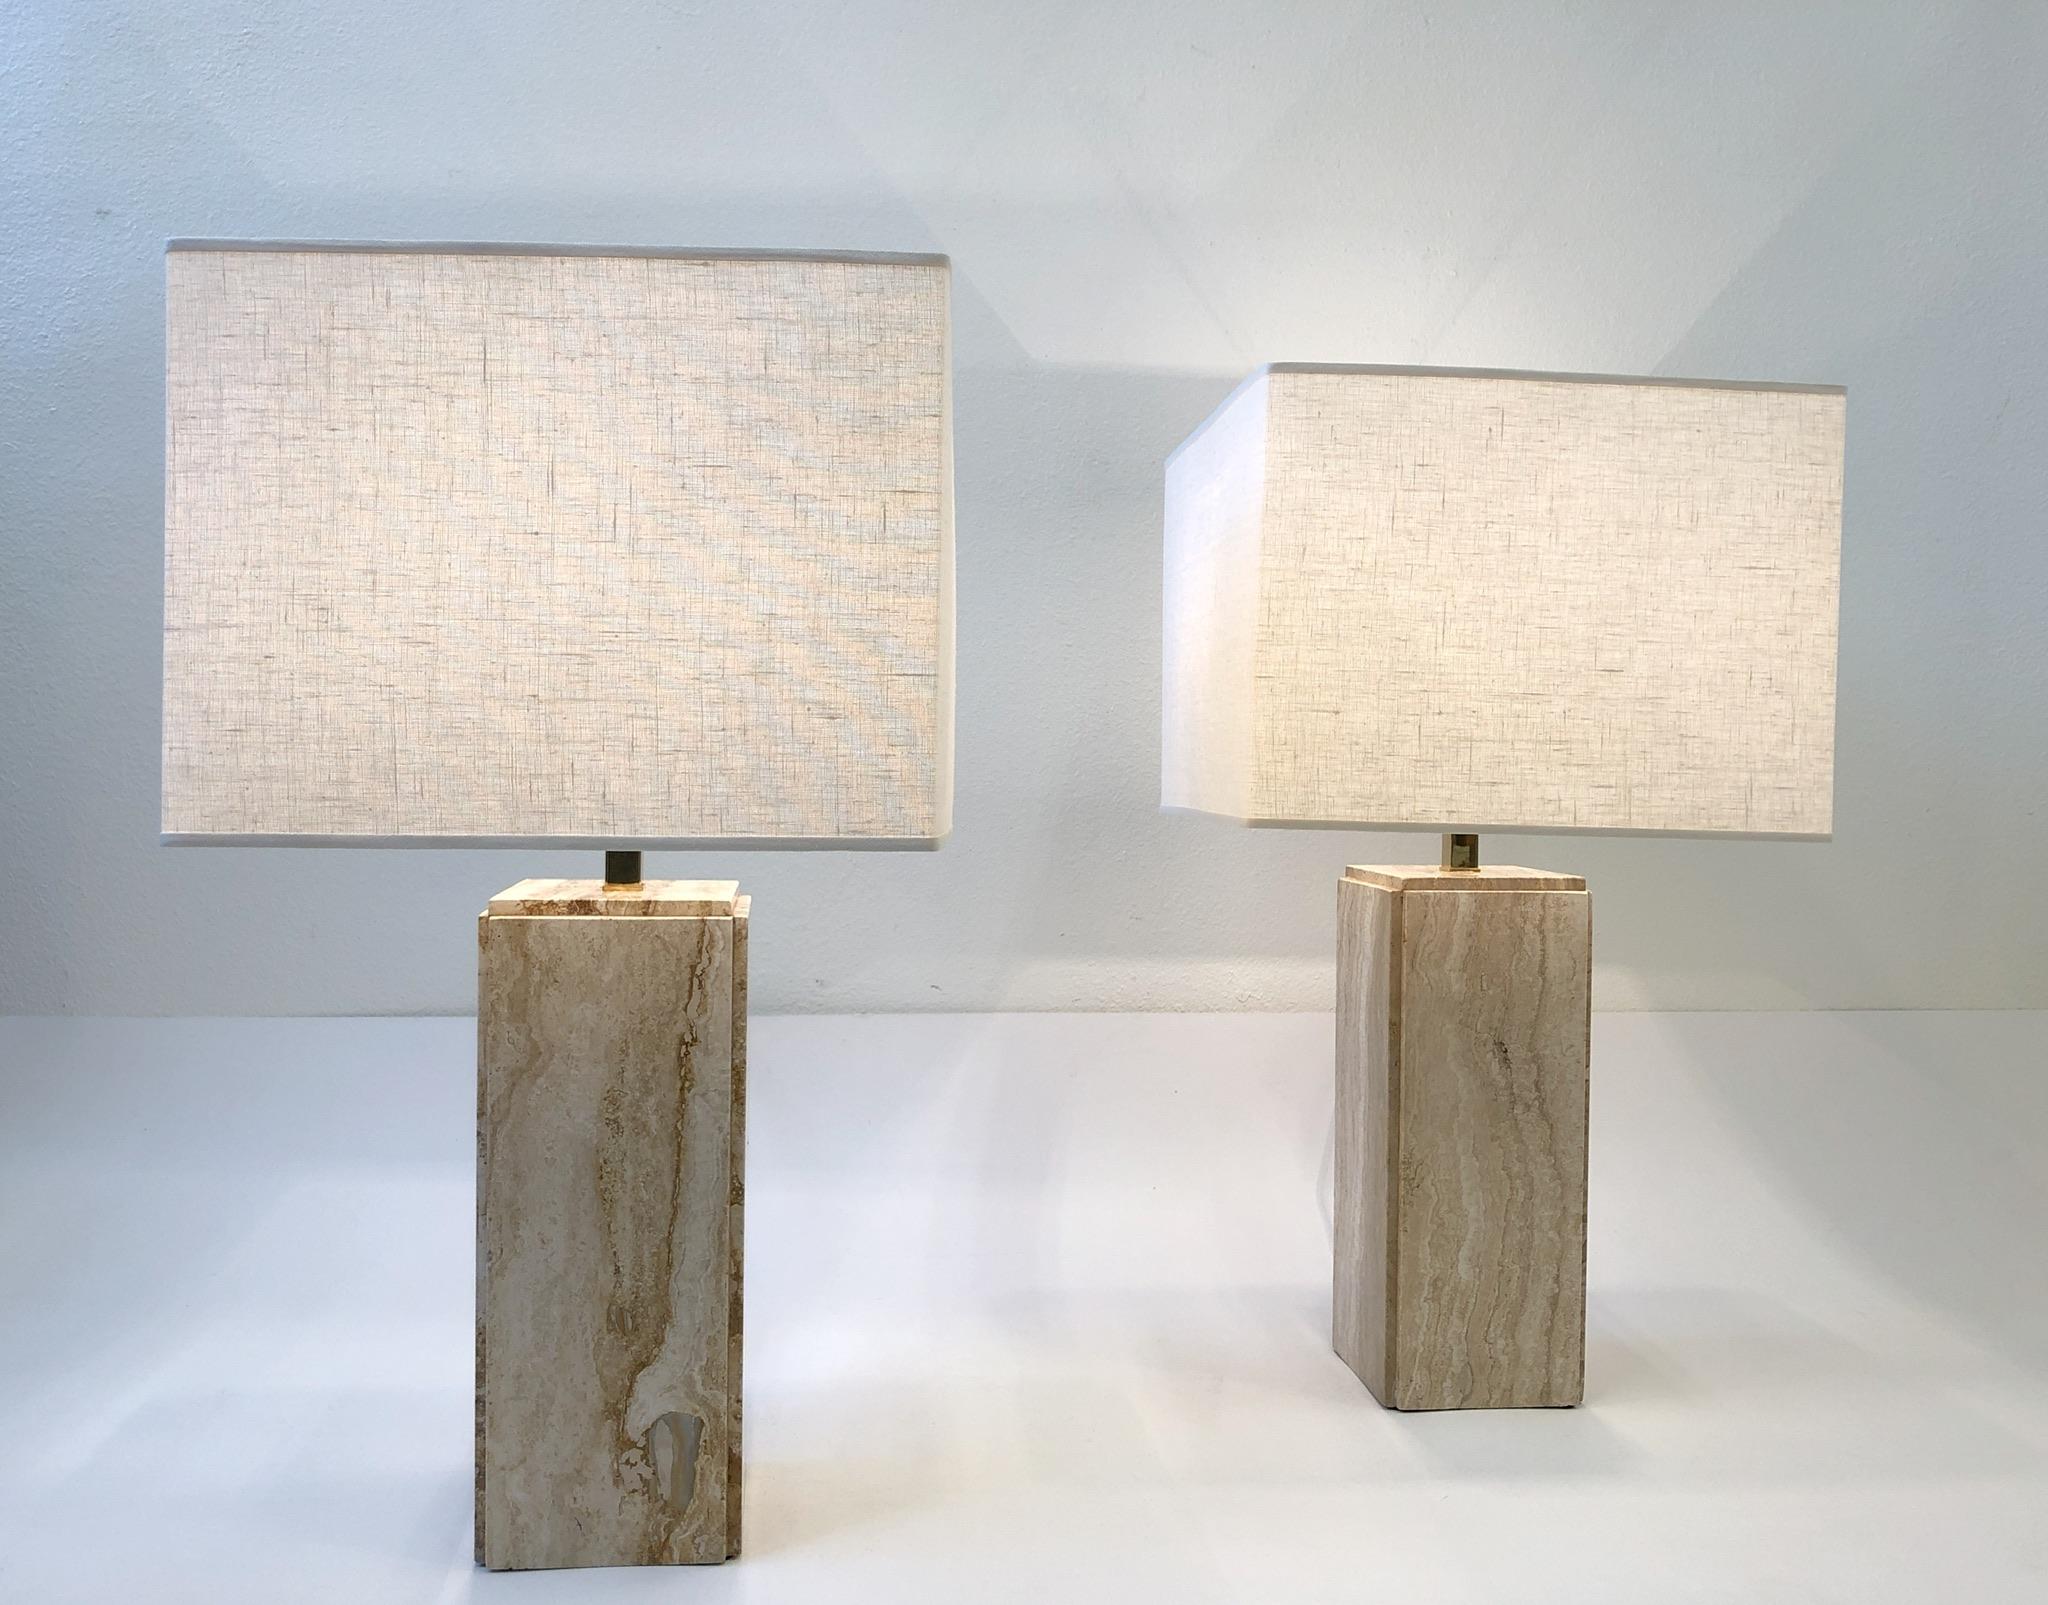 A spectacular pair of Italian travertine and polish brass table lamps design in the 1970s by Raymor.  The lamps have been newly rewired with all new brass hardware and new vanilla linen shade. The lamps are marked made in Italy.
Overall dimension: